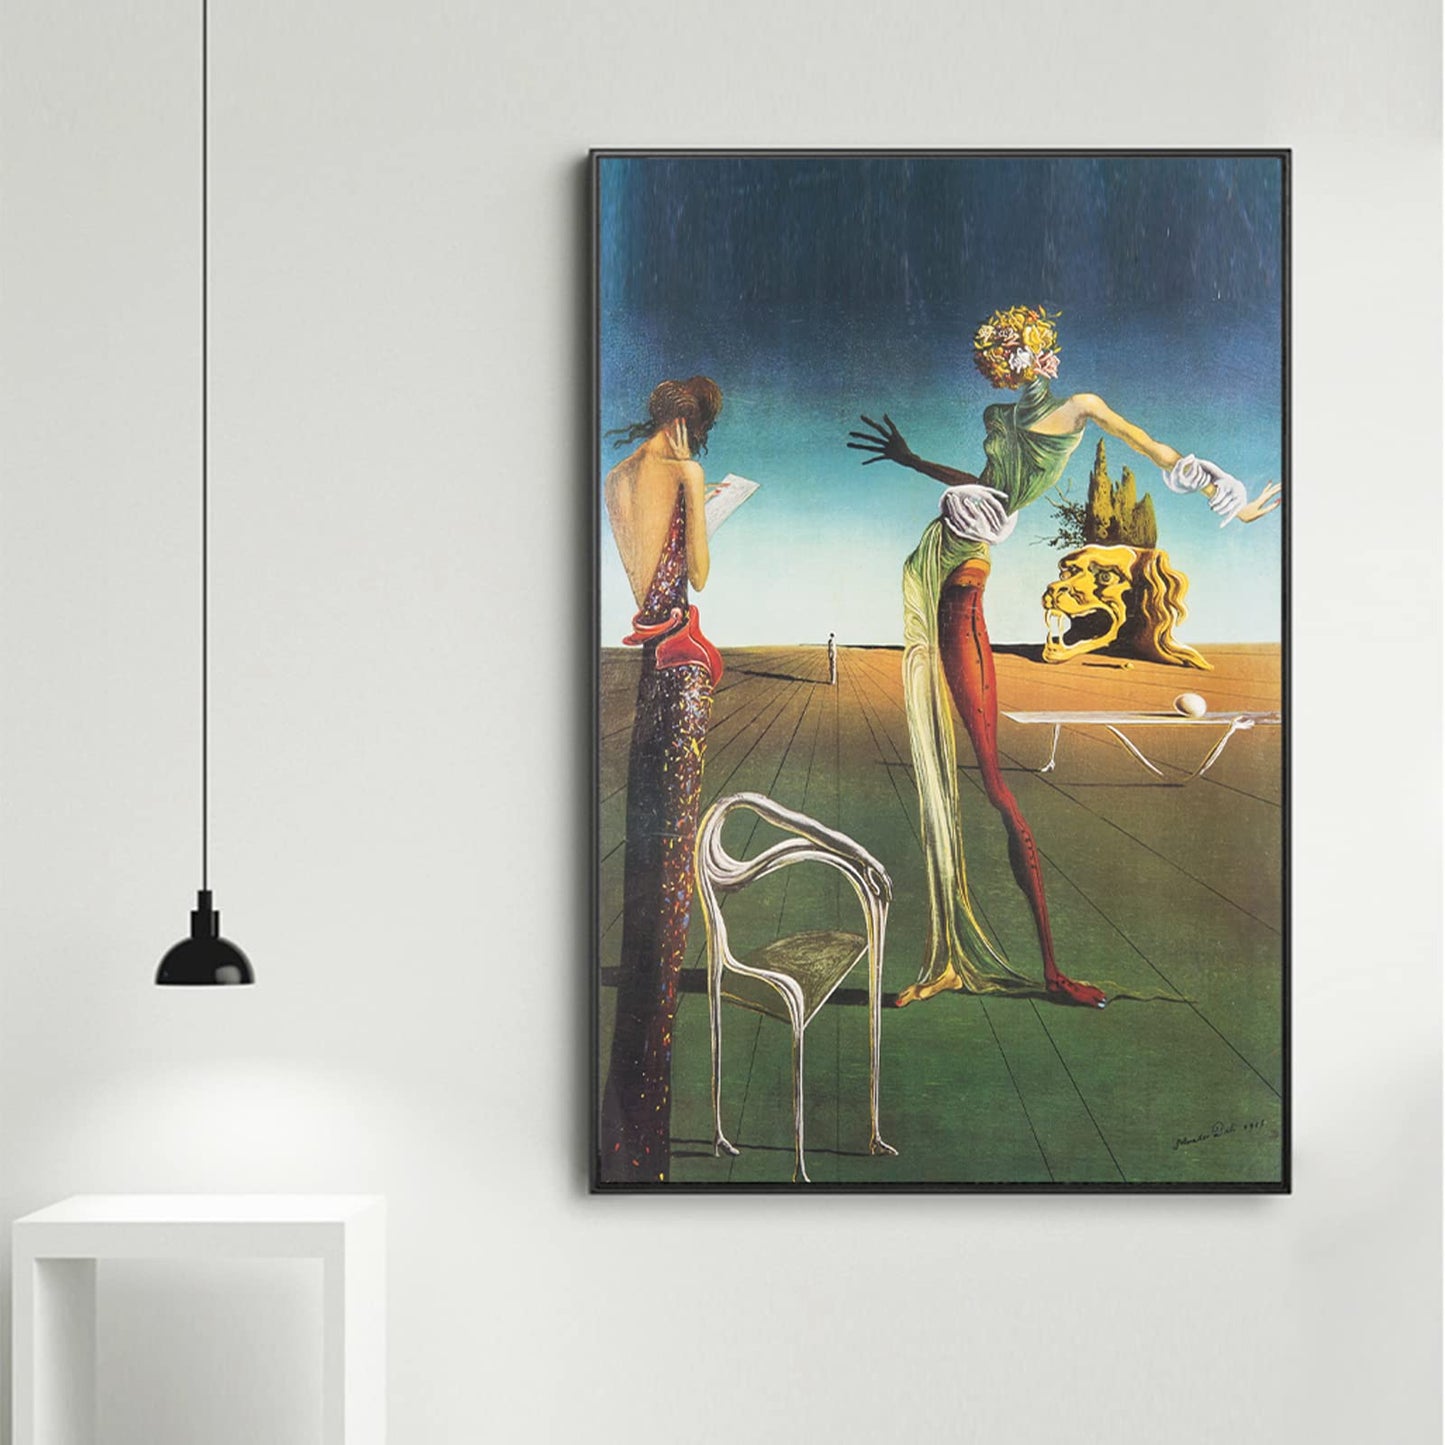 Salvador Dali Wall Art Prints - Woman With a Head of Roses Poster - Surrealism Famous Oil Painting Reproduction Abstract Canvas Pictures for Living Room Bedroom Modern Home Decor - Great Gift(Woman